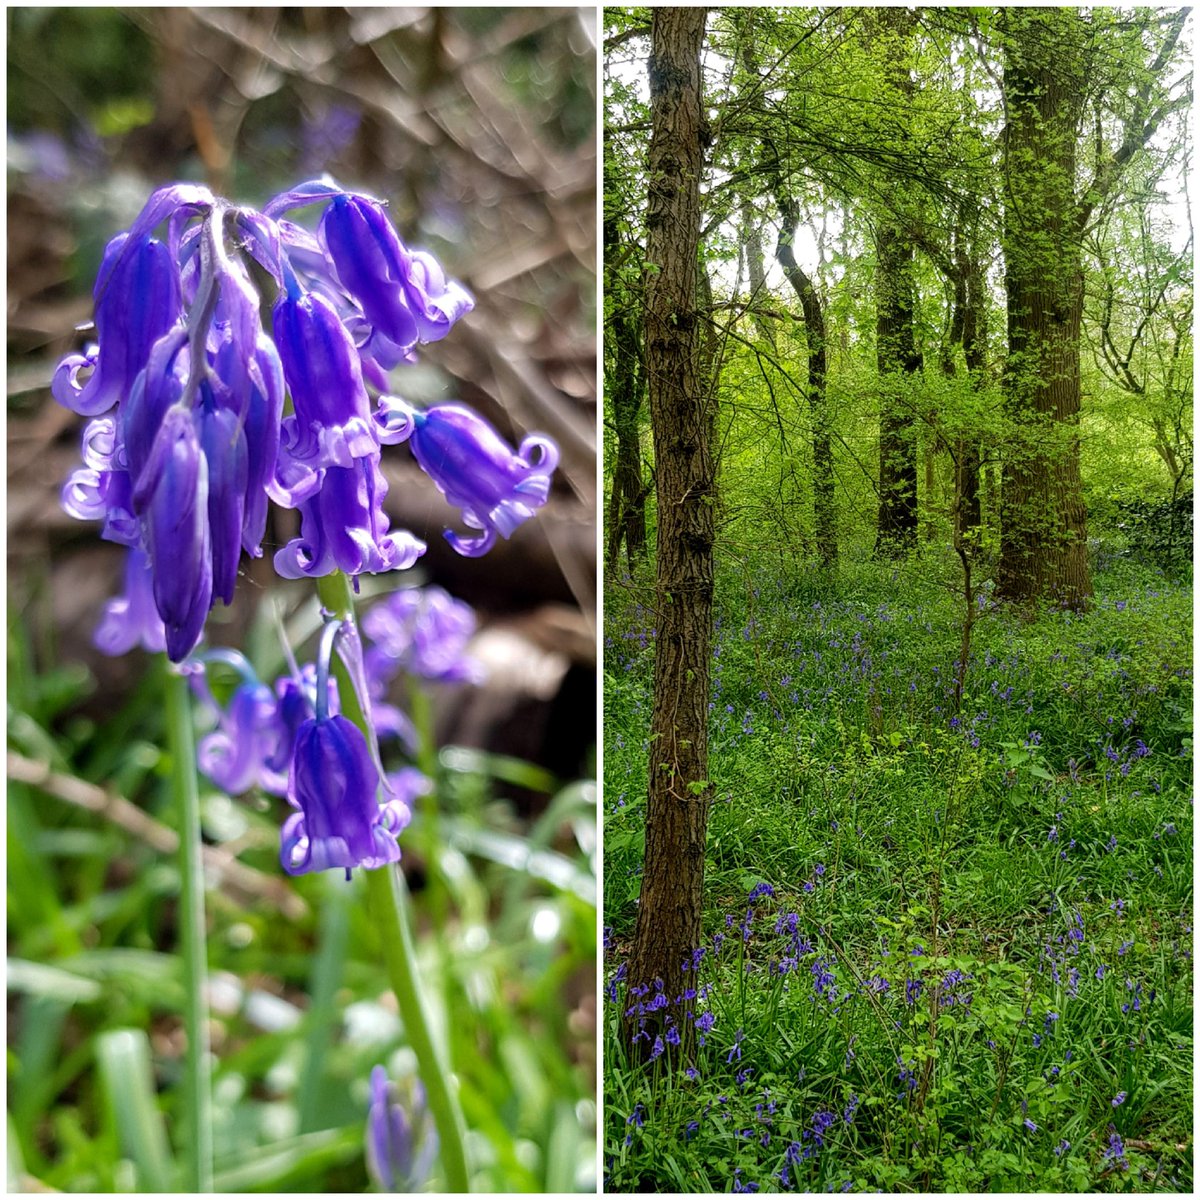 Into the woods again today... #Bluebells #wildflowerhour